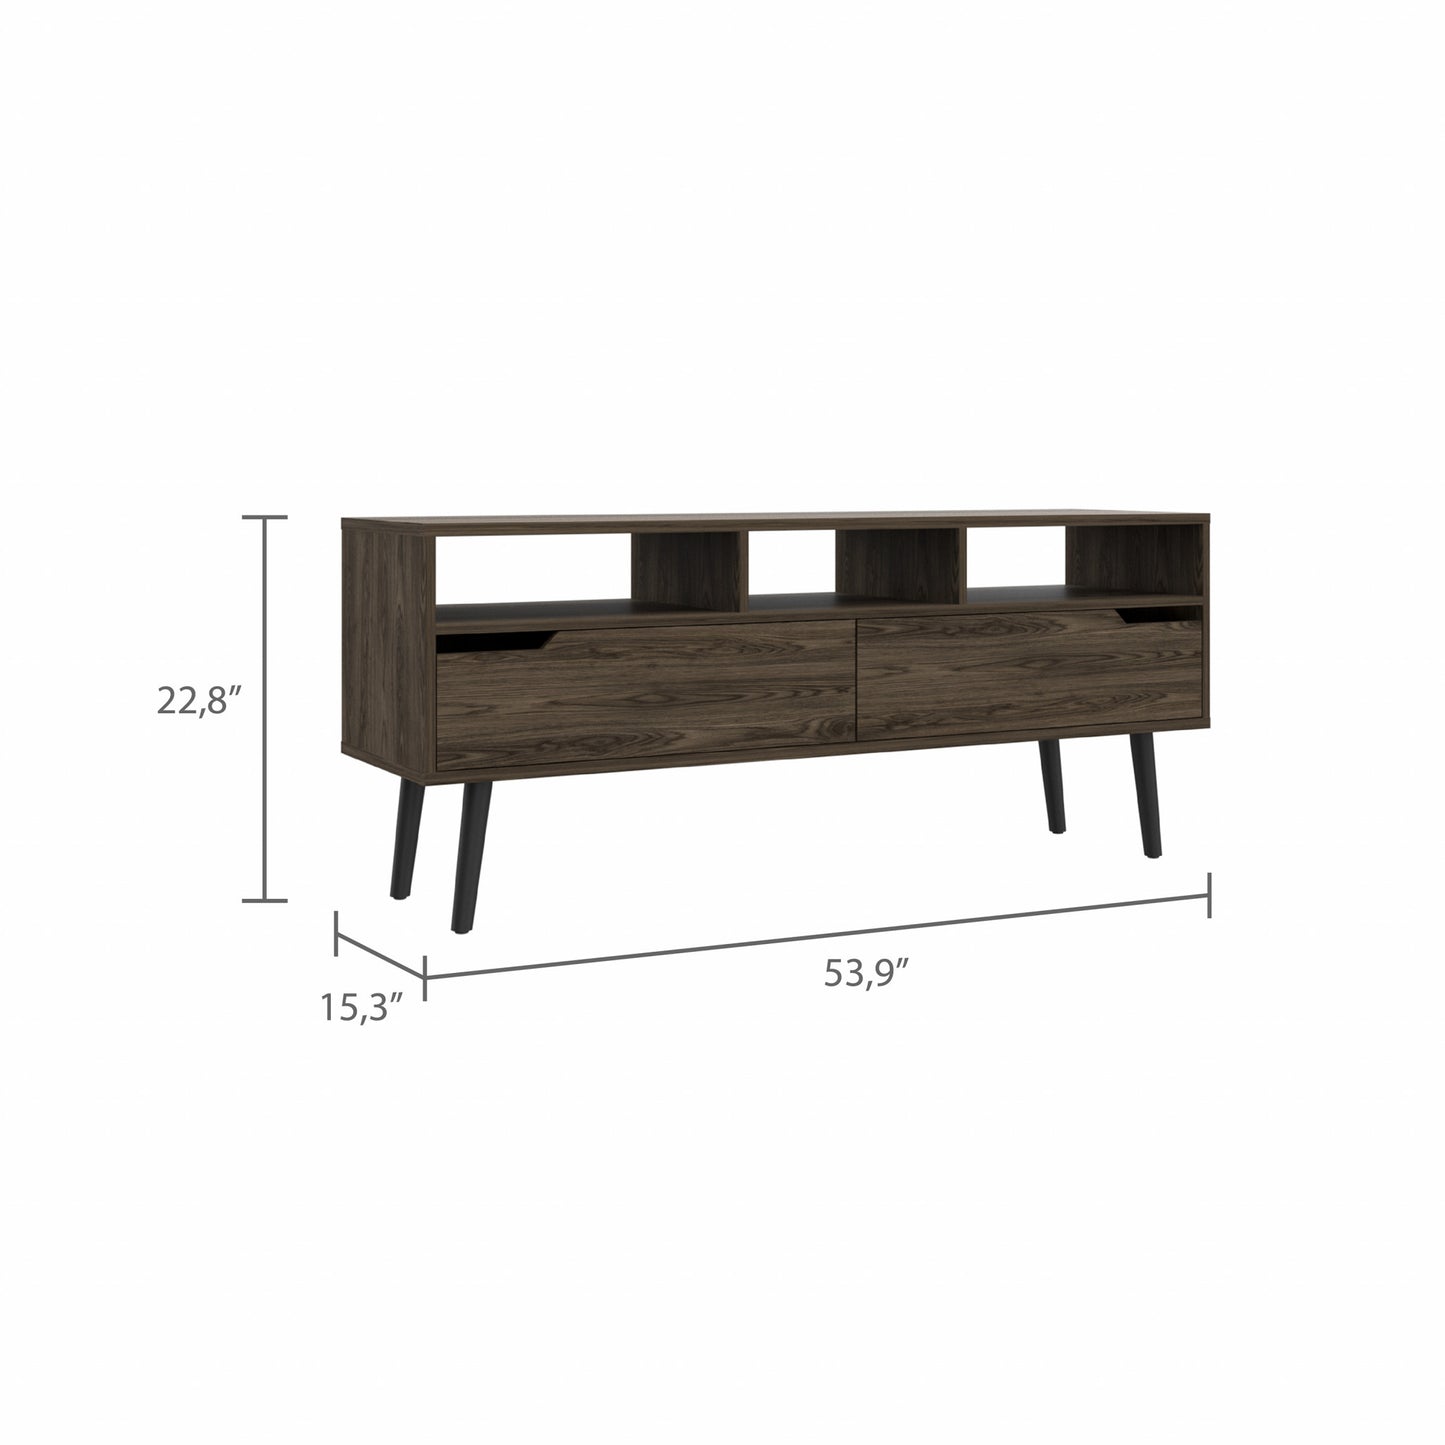 54" Dark Walnut Manufactured Wood Open Shelving TV Stand By Homeroots